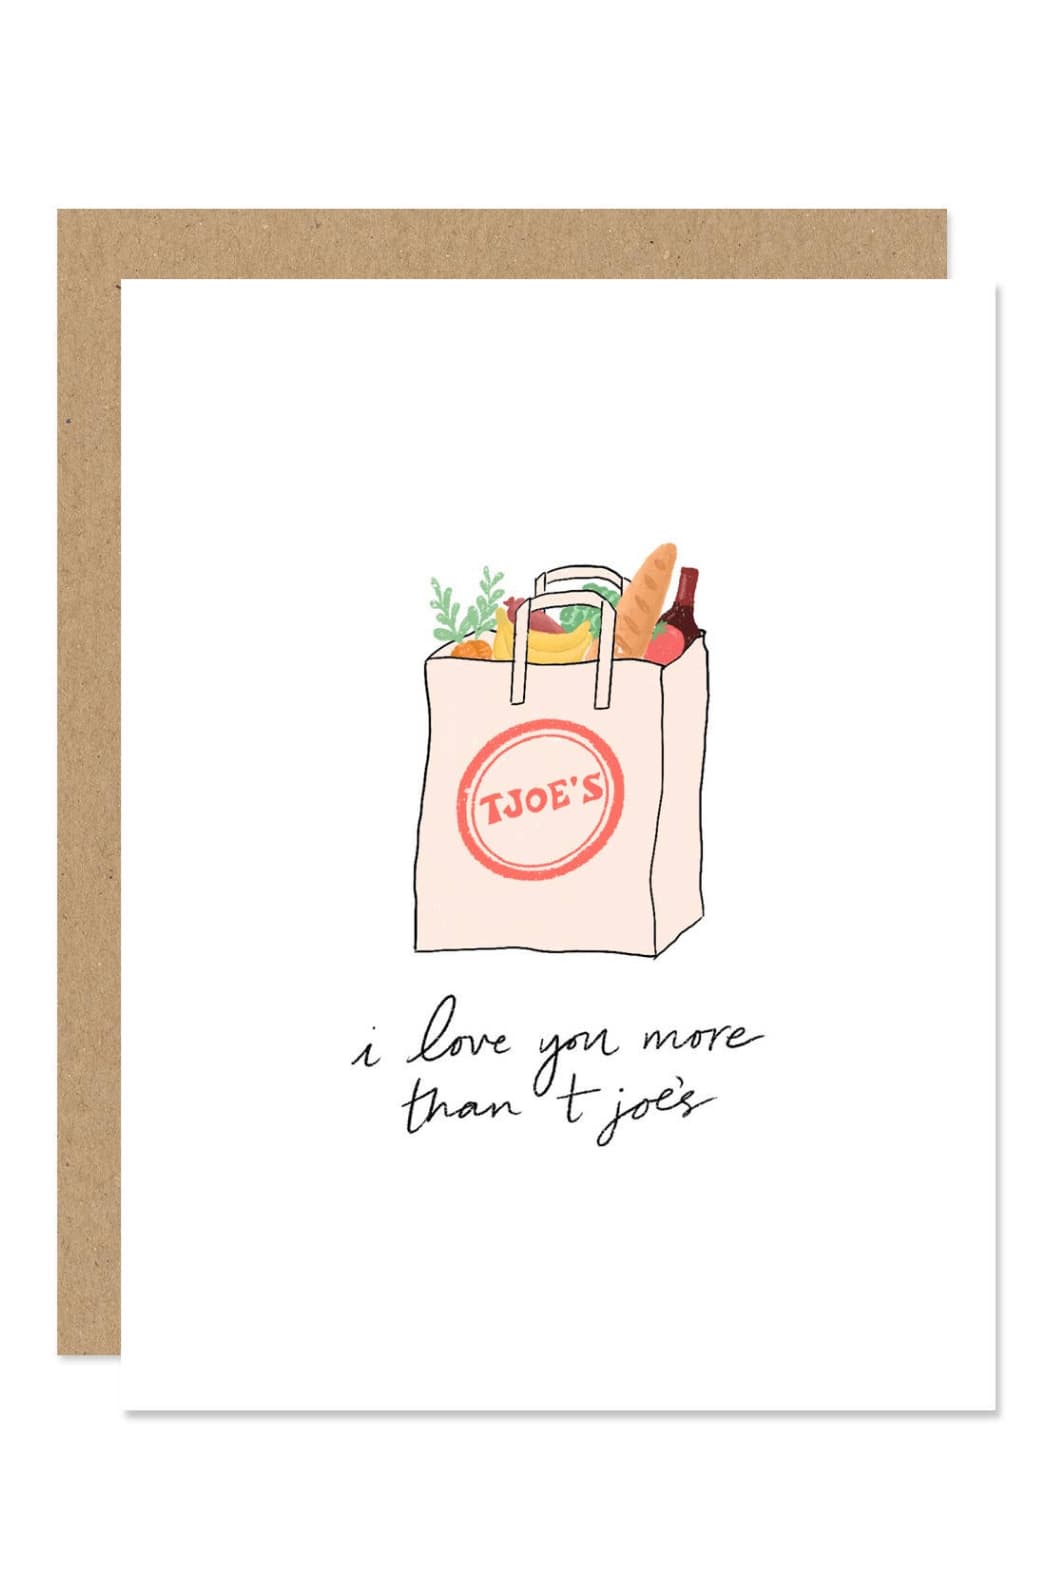 T Joe's Greeting Card - Greeting & Note Cards